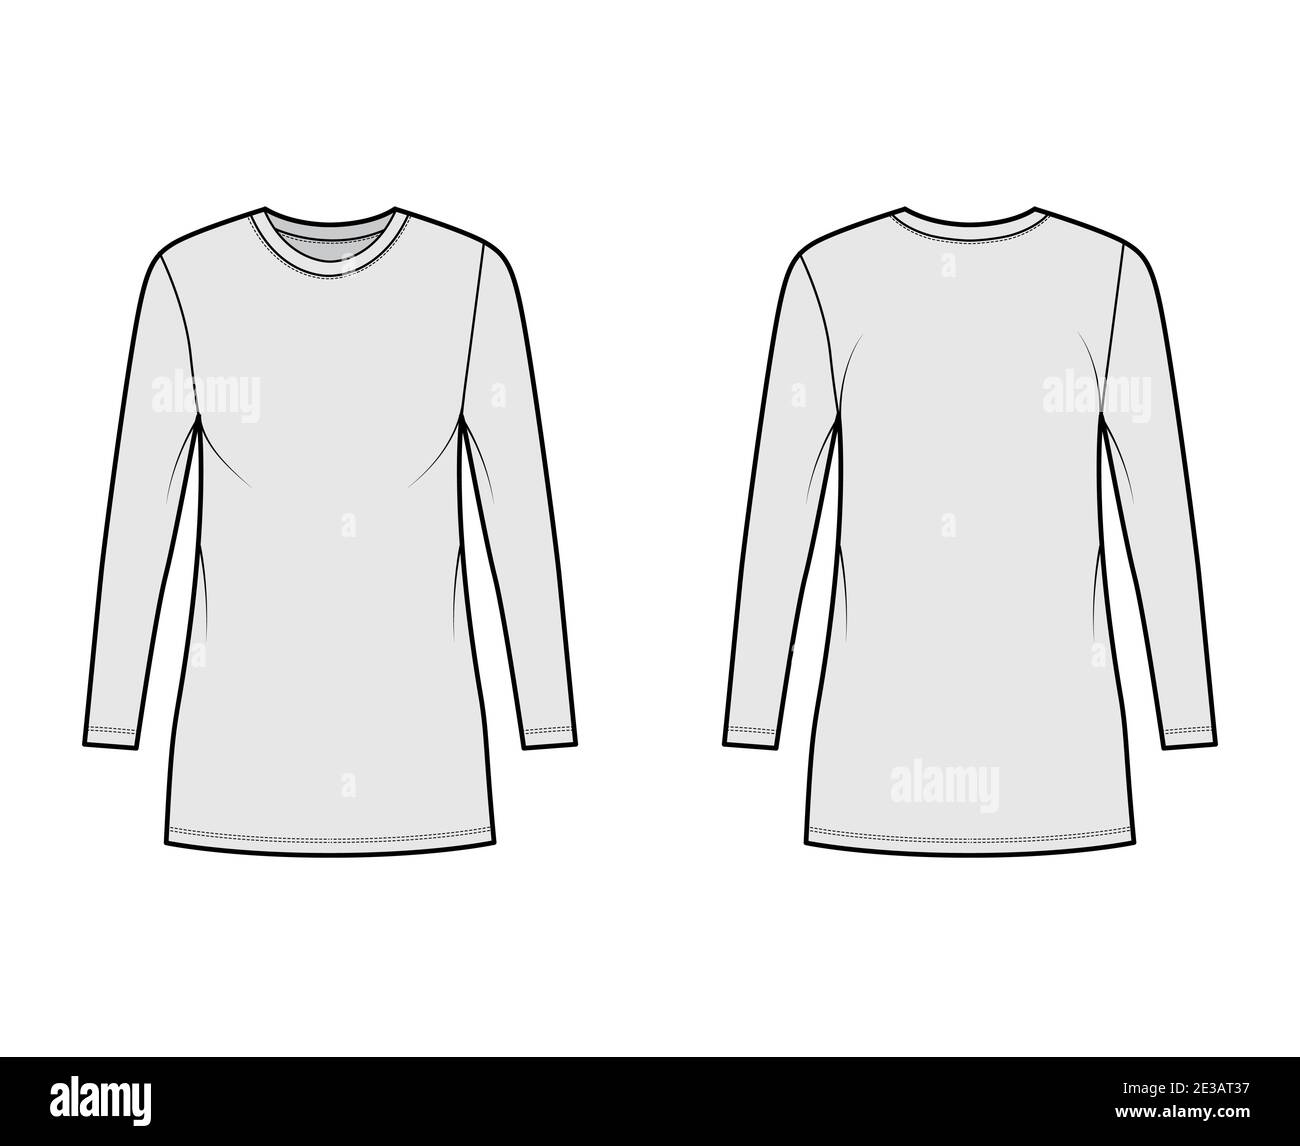 T-shirt dress technical fashion illustration with crew neck, long sleeves, mini length, oversized, Pencil fullness. Flat apparel template front, back, grey color. Women, men, unisex CAD mockup Stock Vector